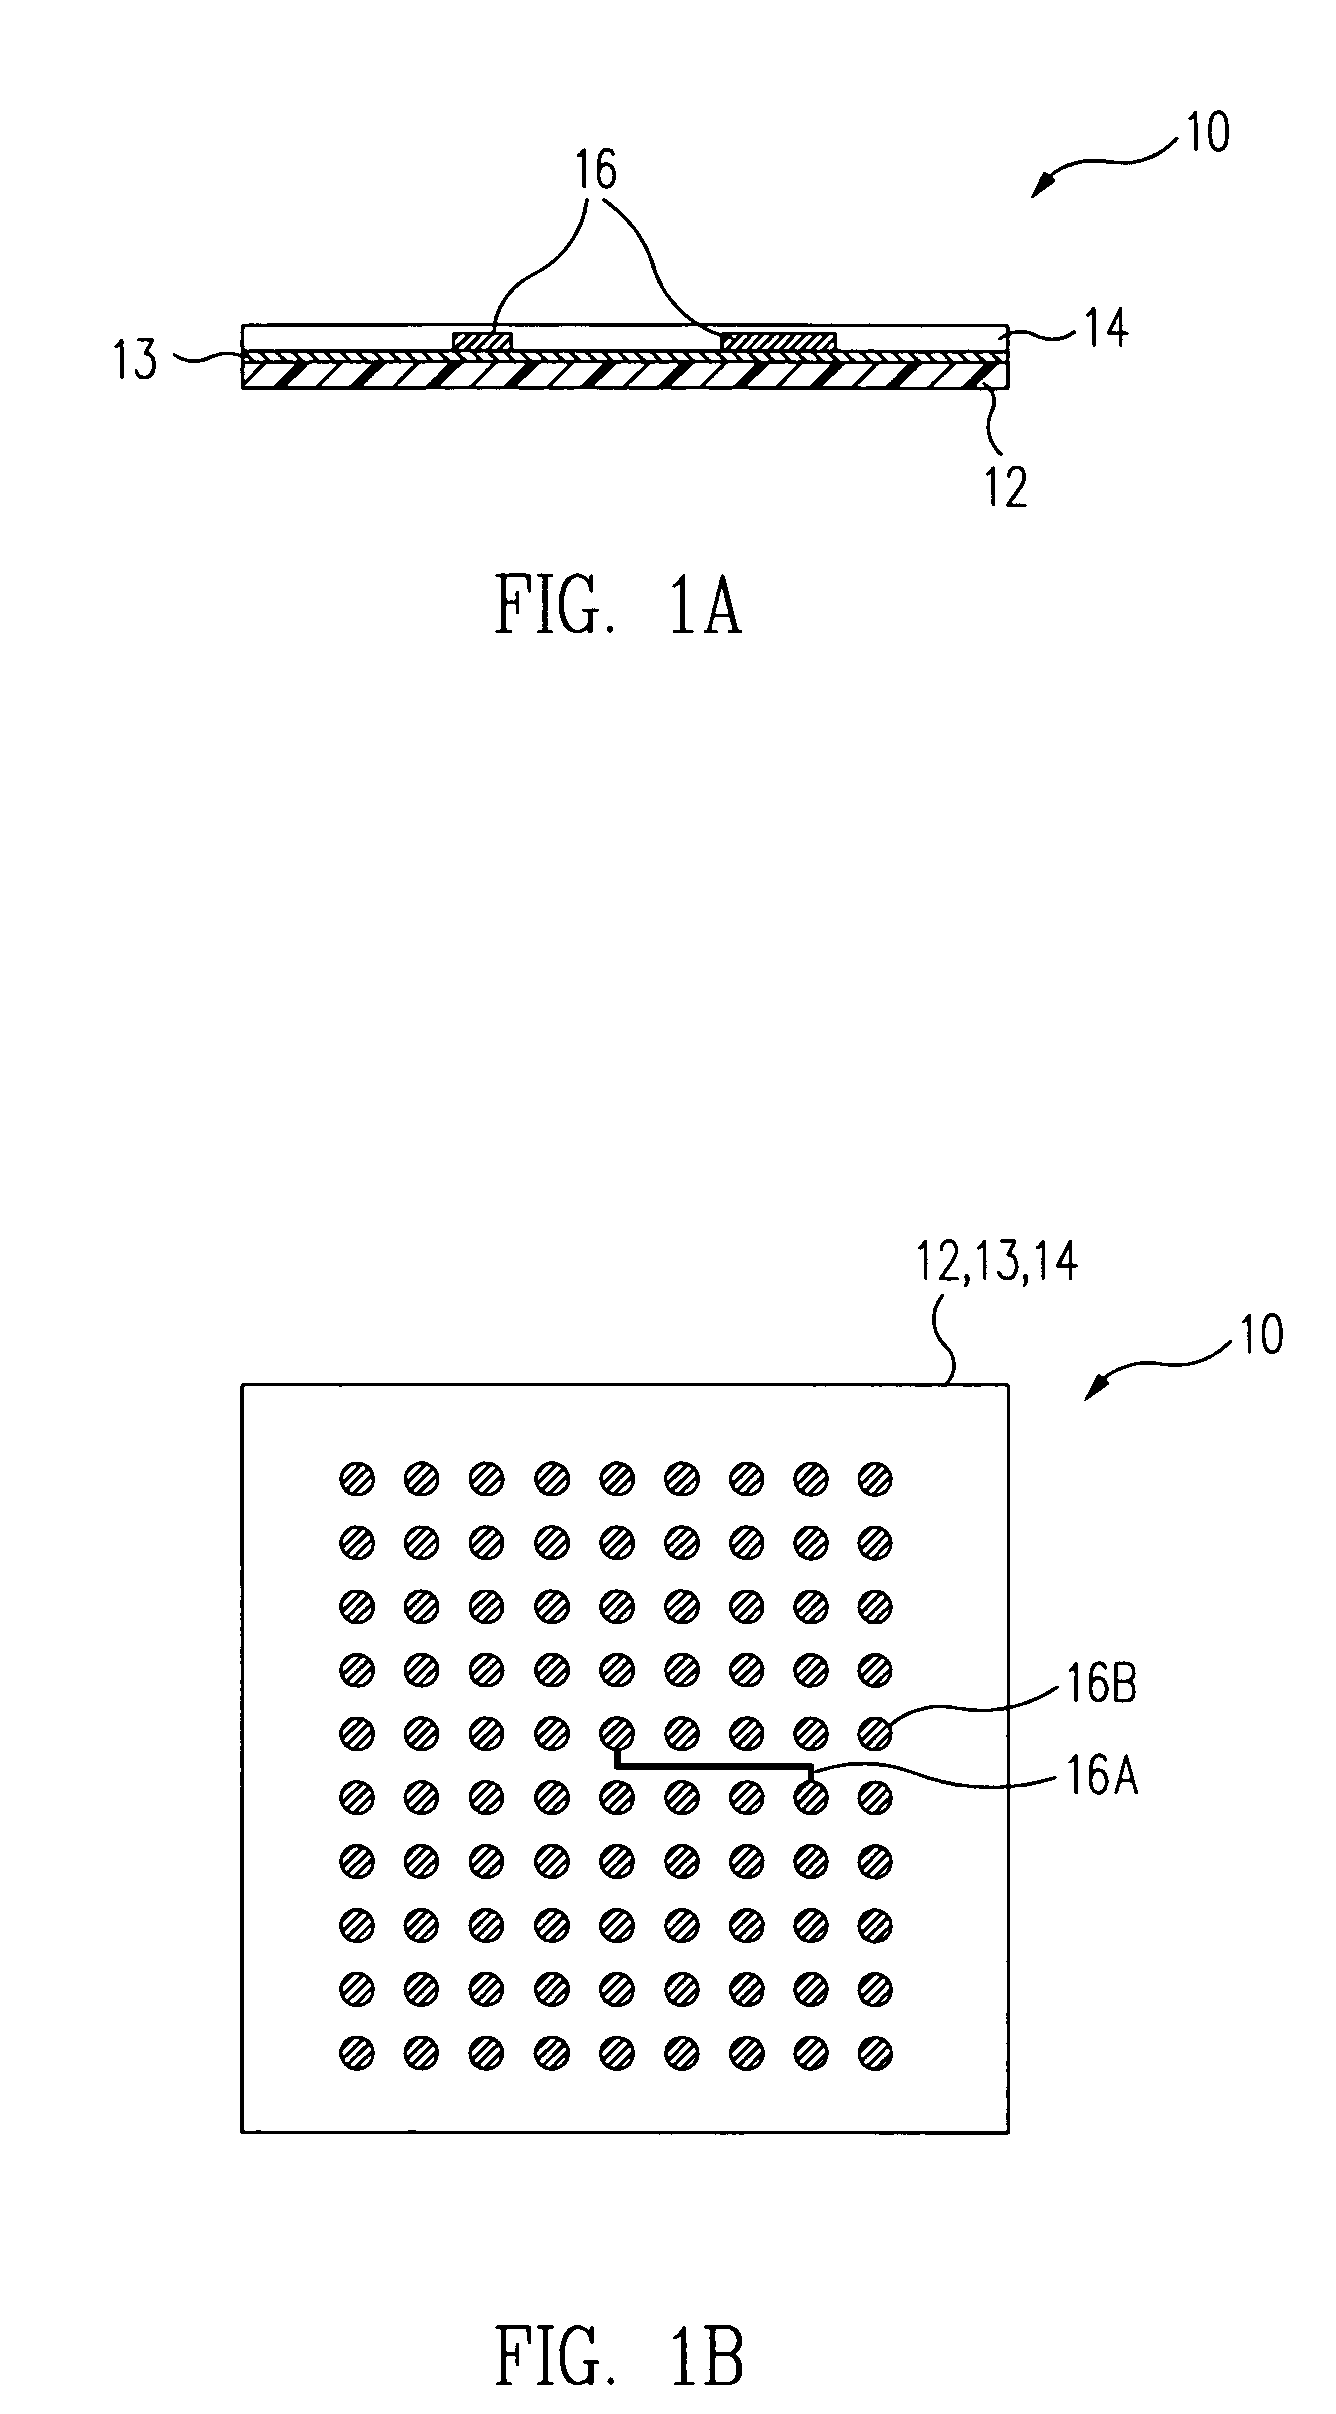 Method for making an integrated circuit substrate having embedded back-side access conductors and vias